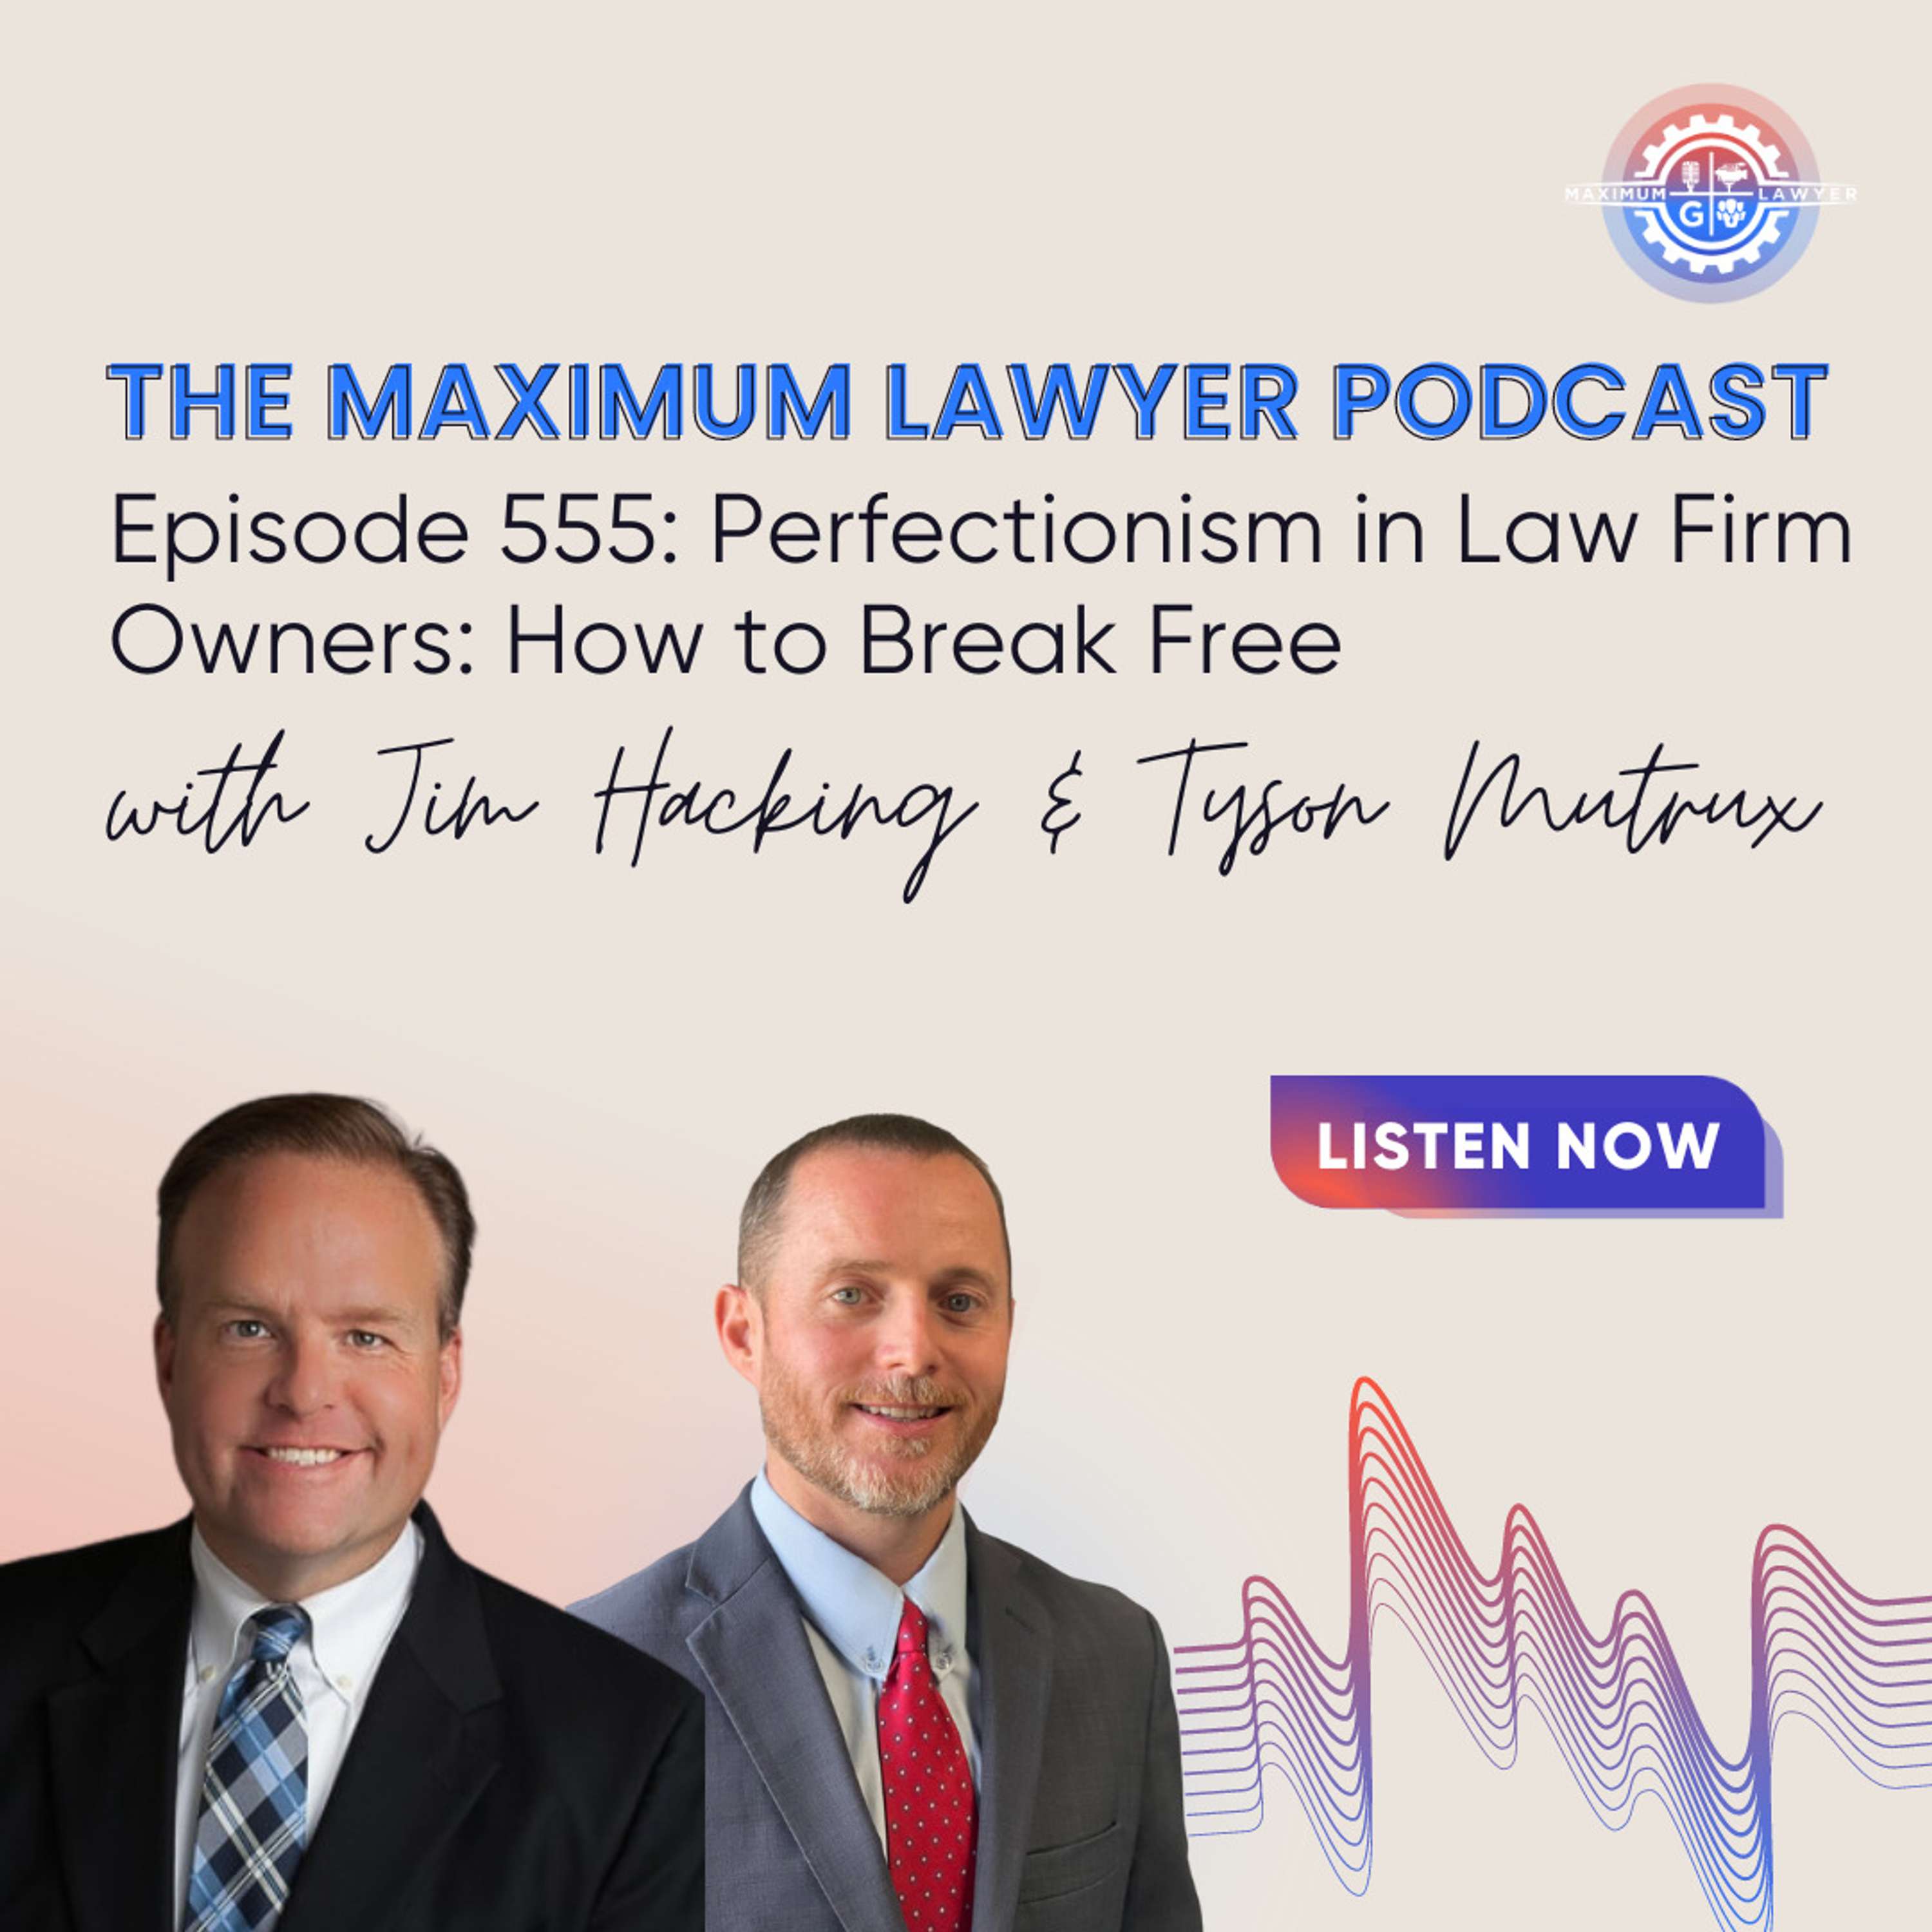 Perfectionism in Law Firm Owners: How to Break Free and Make Progress